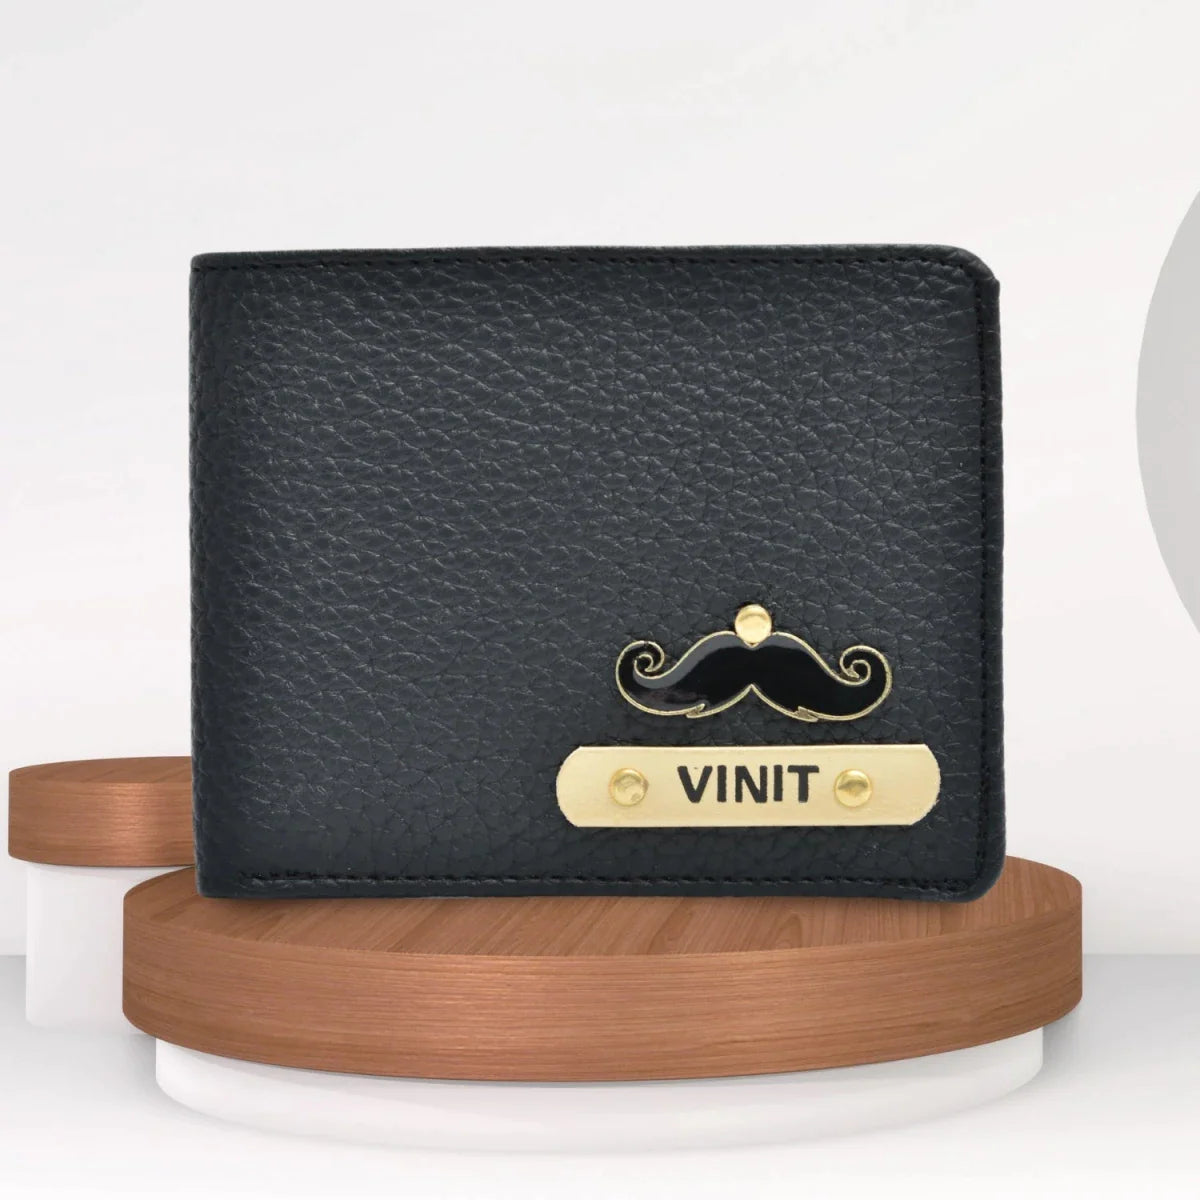 Get organized in style with our range of personalized men's wallets. Best gifts in Jaipur.